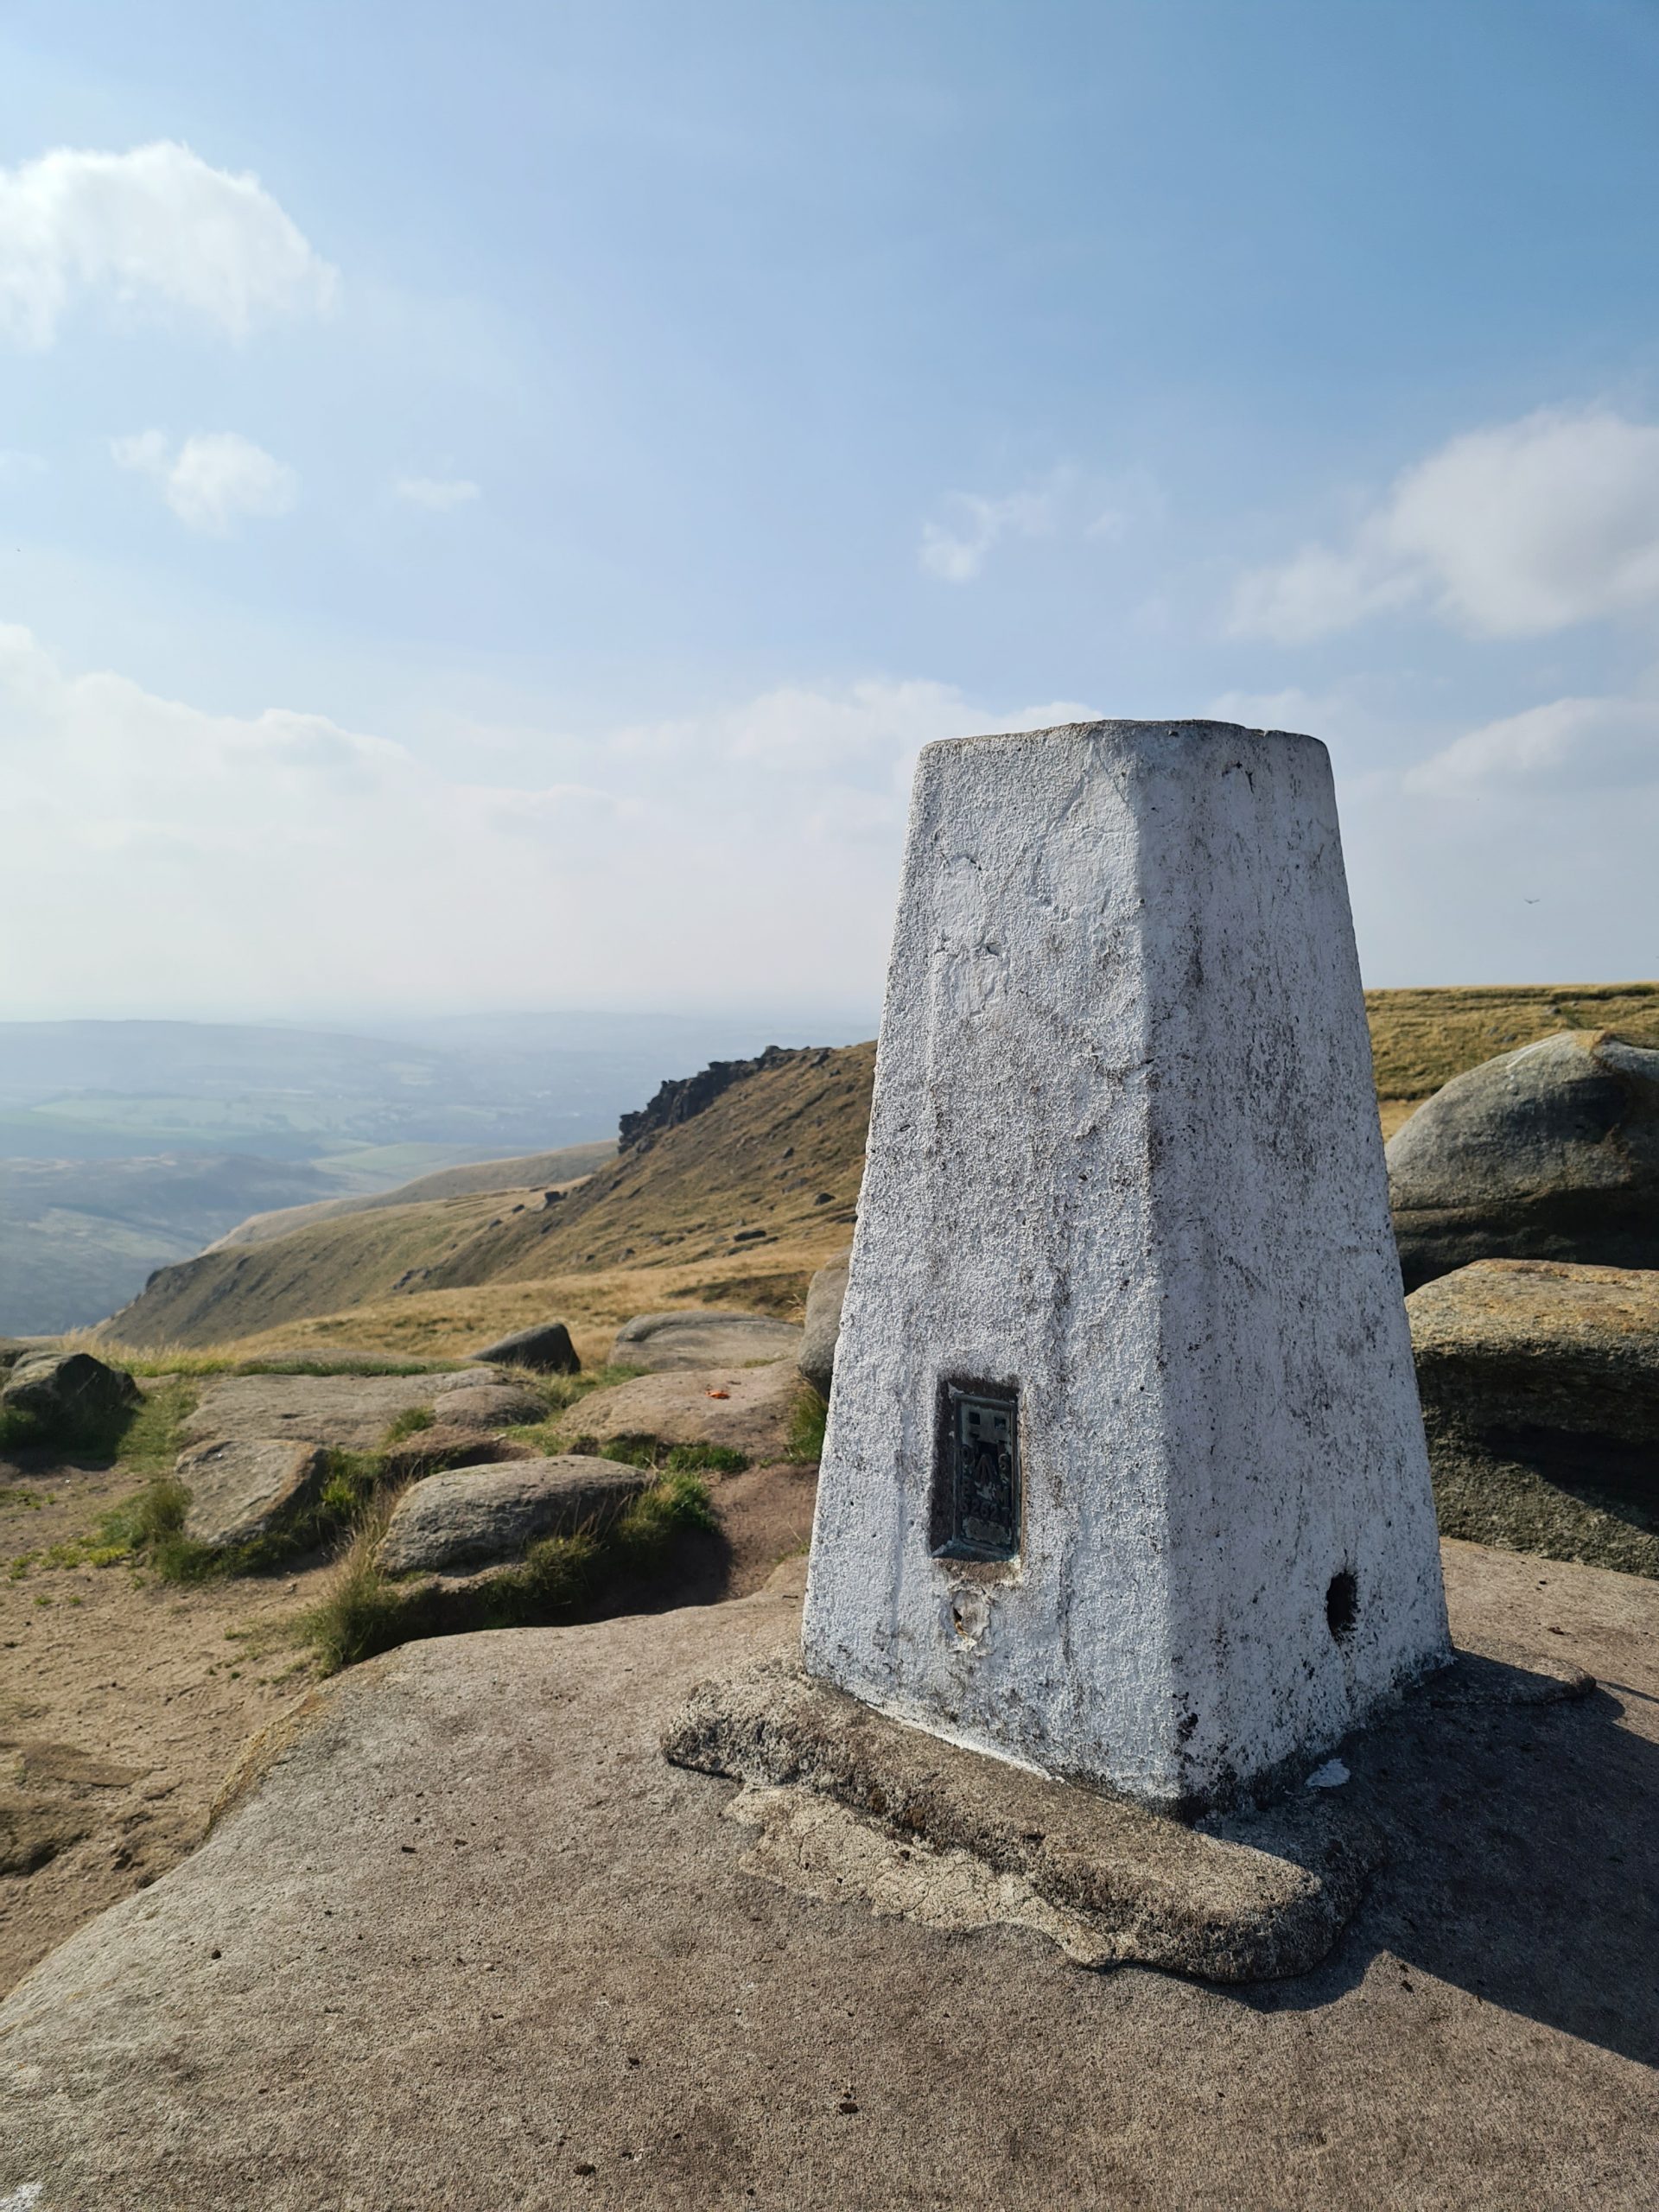 Trig point at Higher Shelf Stones - The Wandering Wildflower